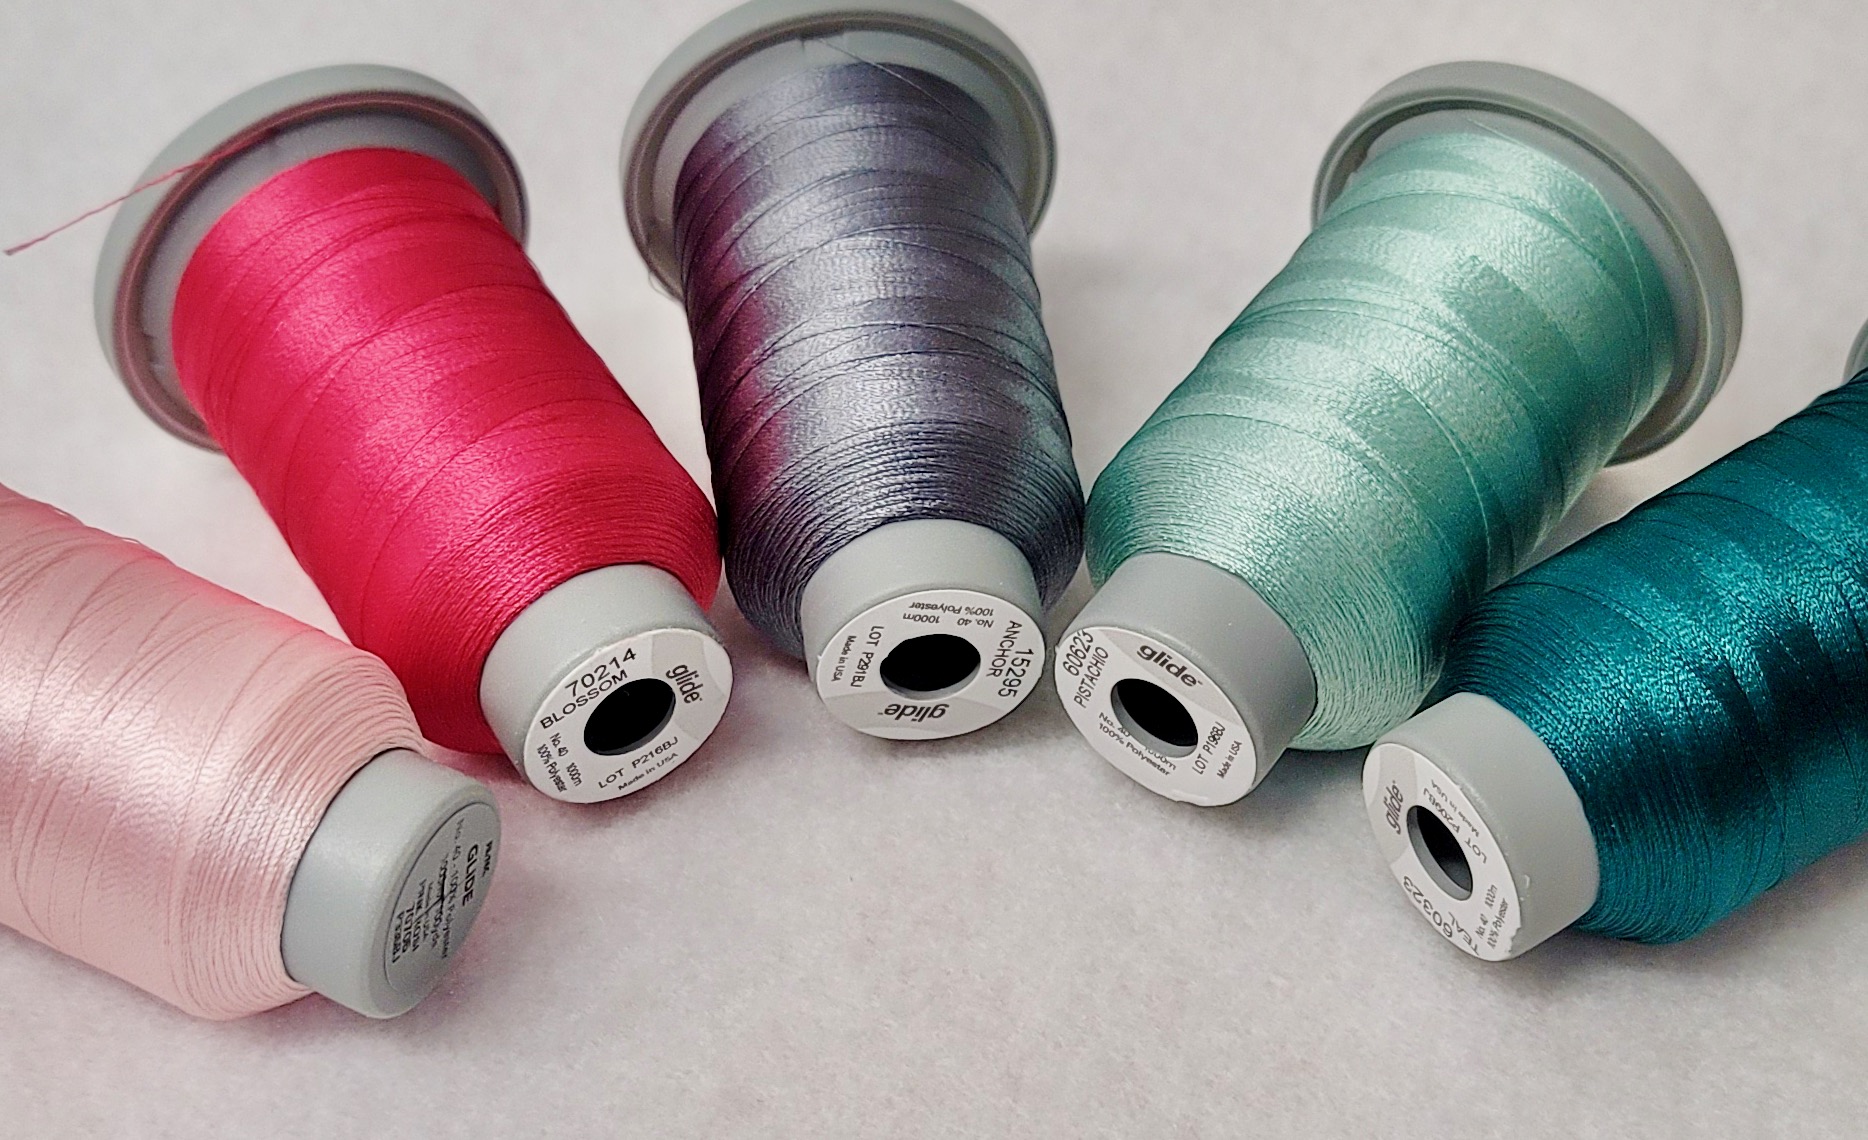 Glide Thread- 40wt Poly for Free Motion Quilting